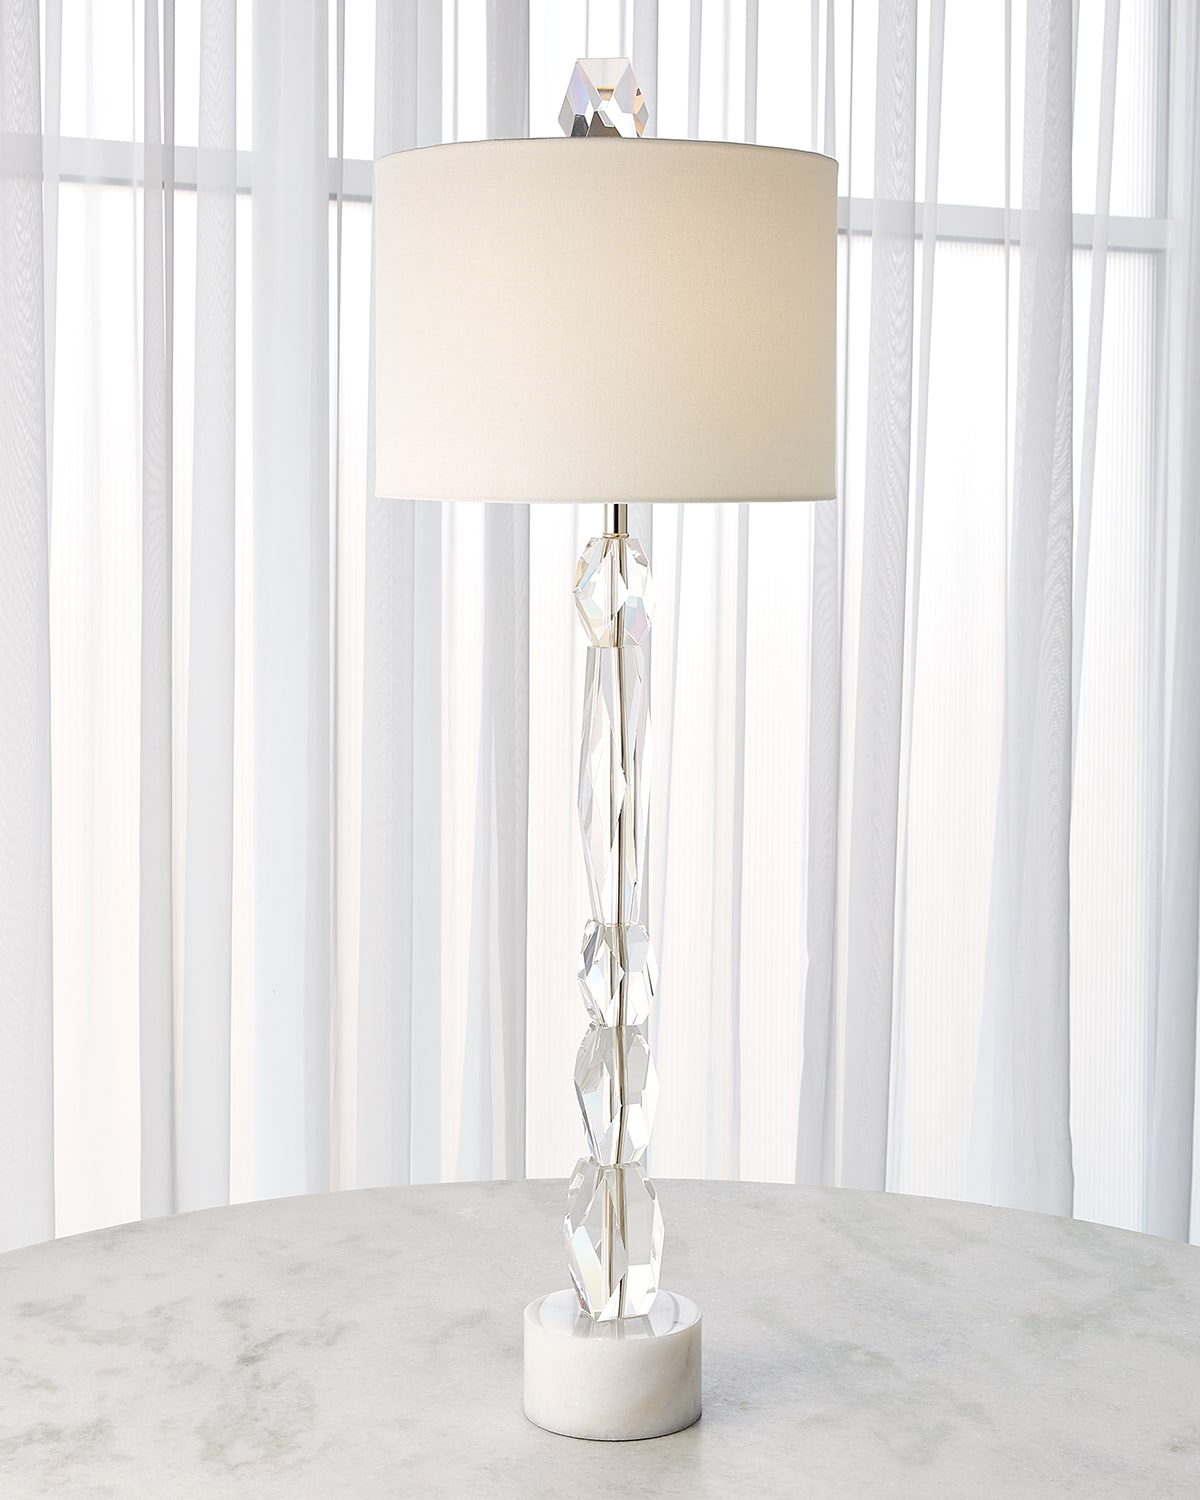 White Crystal Lamp Neiman Marcus, Pier 1 Imports Teardrop Luxe Table Lamps